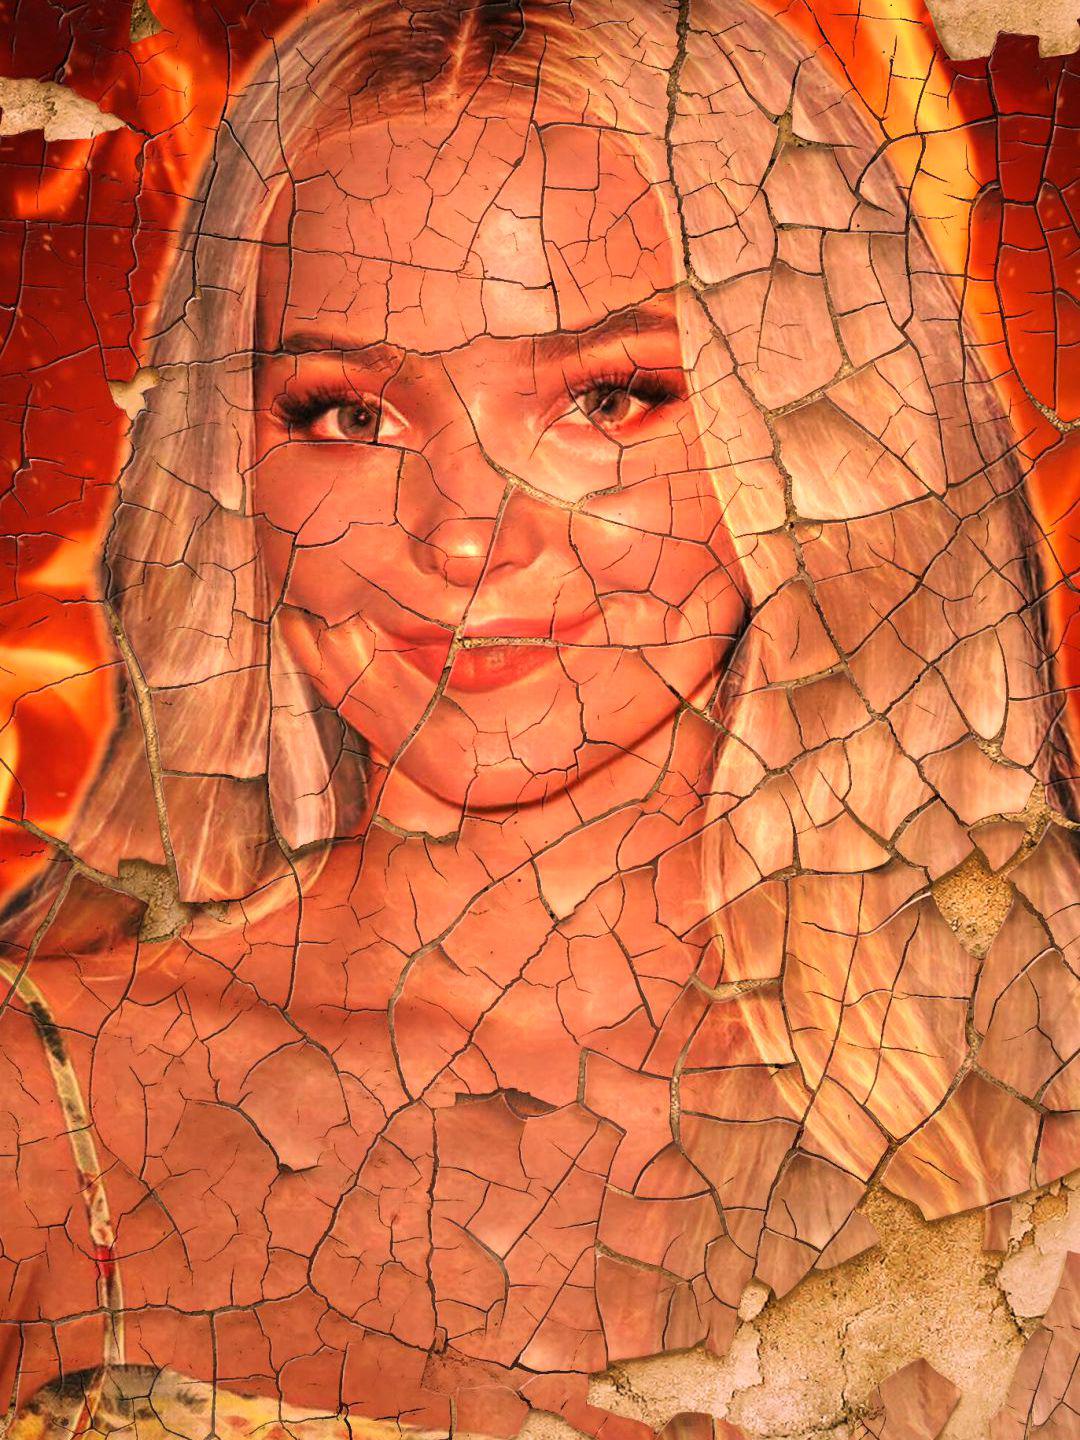 Dove Cameron - Celeb ART - Beautiful Artworks of Celebrities, Footballers,  Politicians and Famous People in World | OpenSea